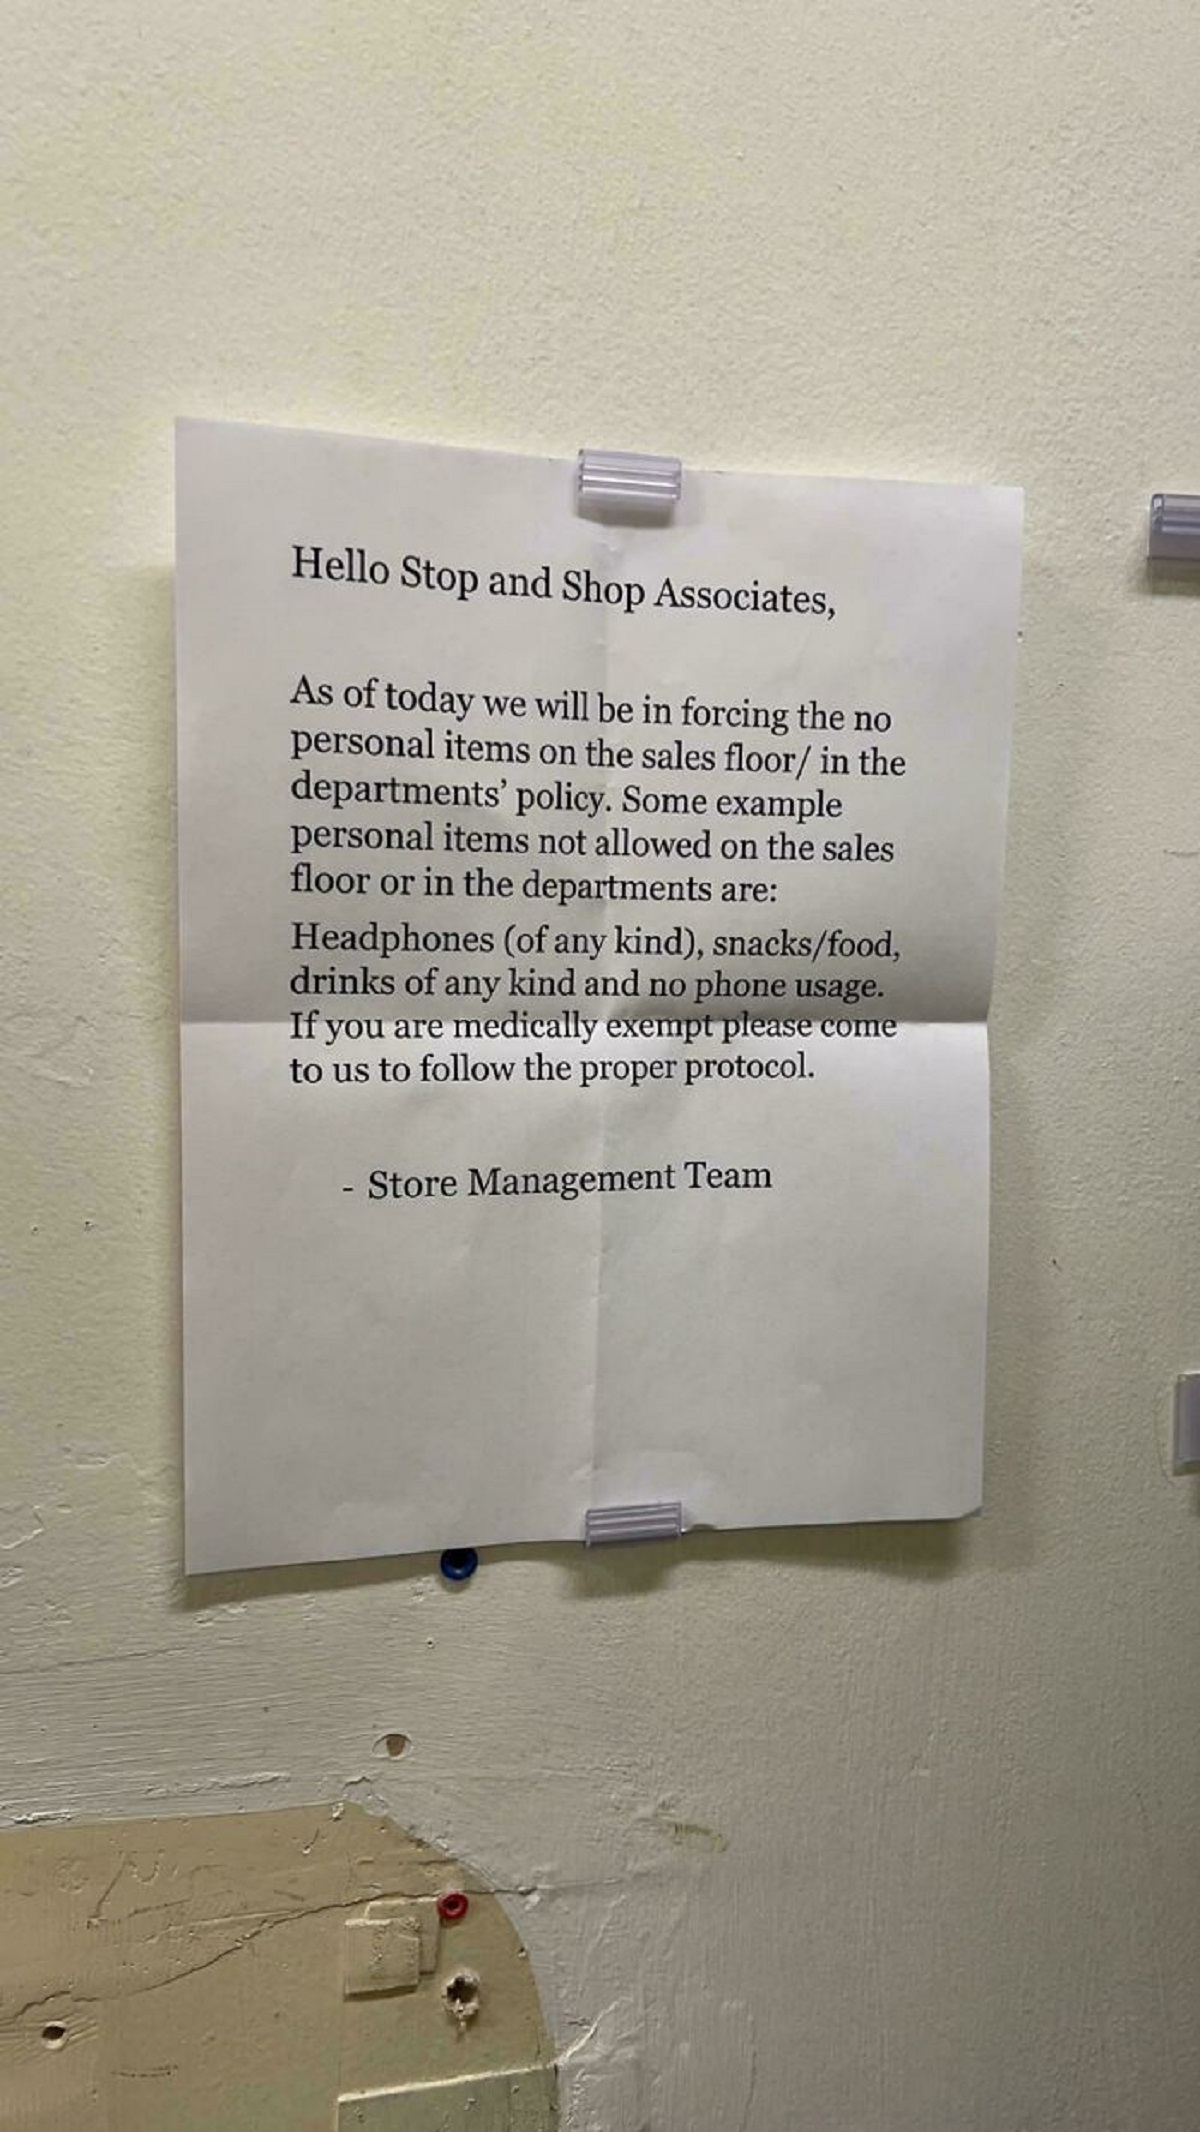 document - Hello Stop and Shop Associates, As of today we will be in forcing the no personal items on the sales floor in the departments' policy. Some example personal items not allowed on the sales floor or in the departments are Headphones of any kind, 